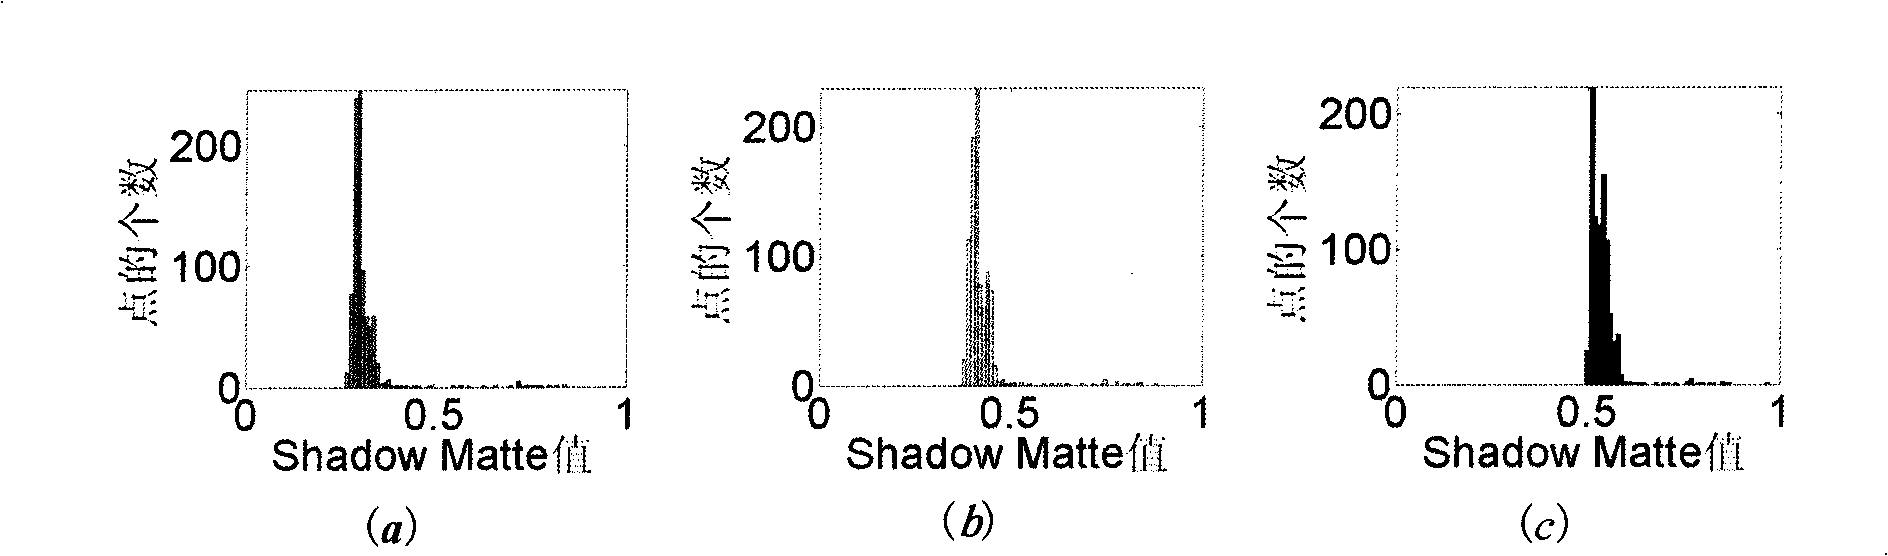 Picture counterfeiting detection method based on shadow matte consistency